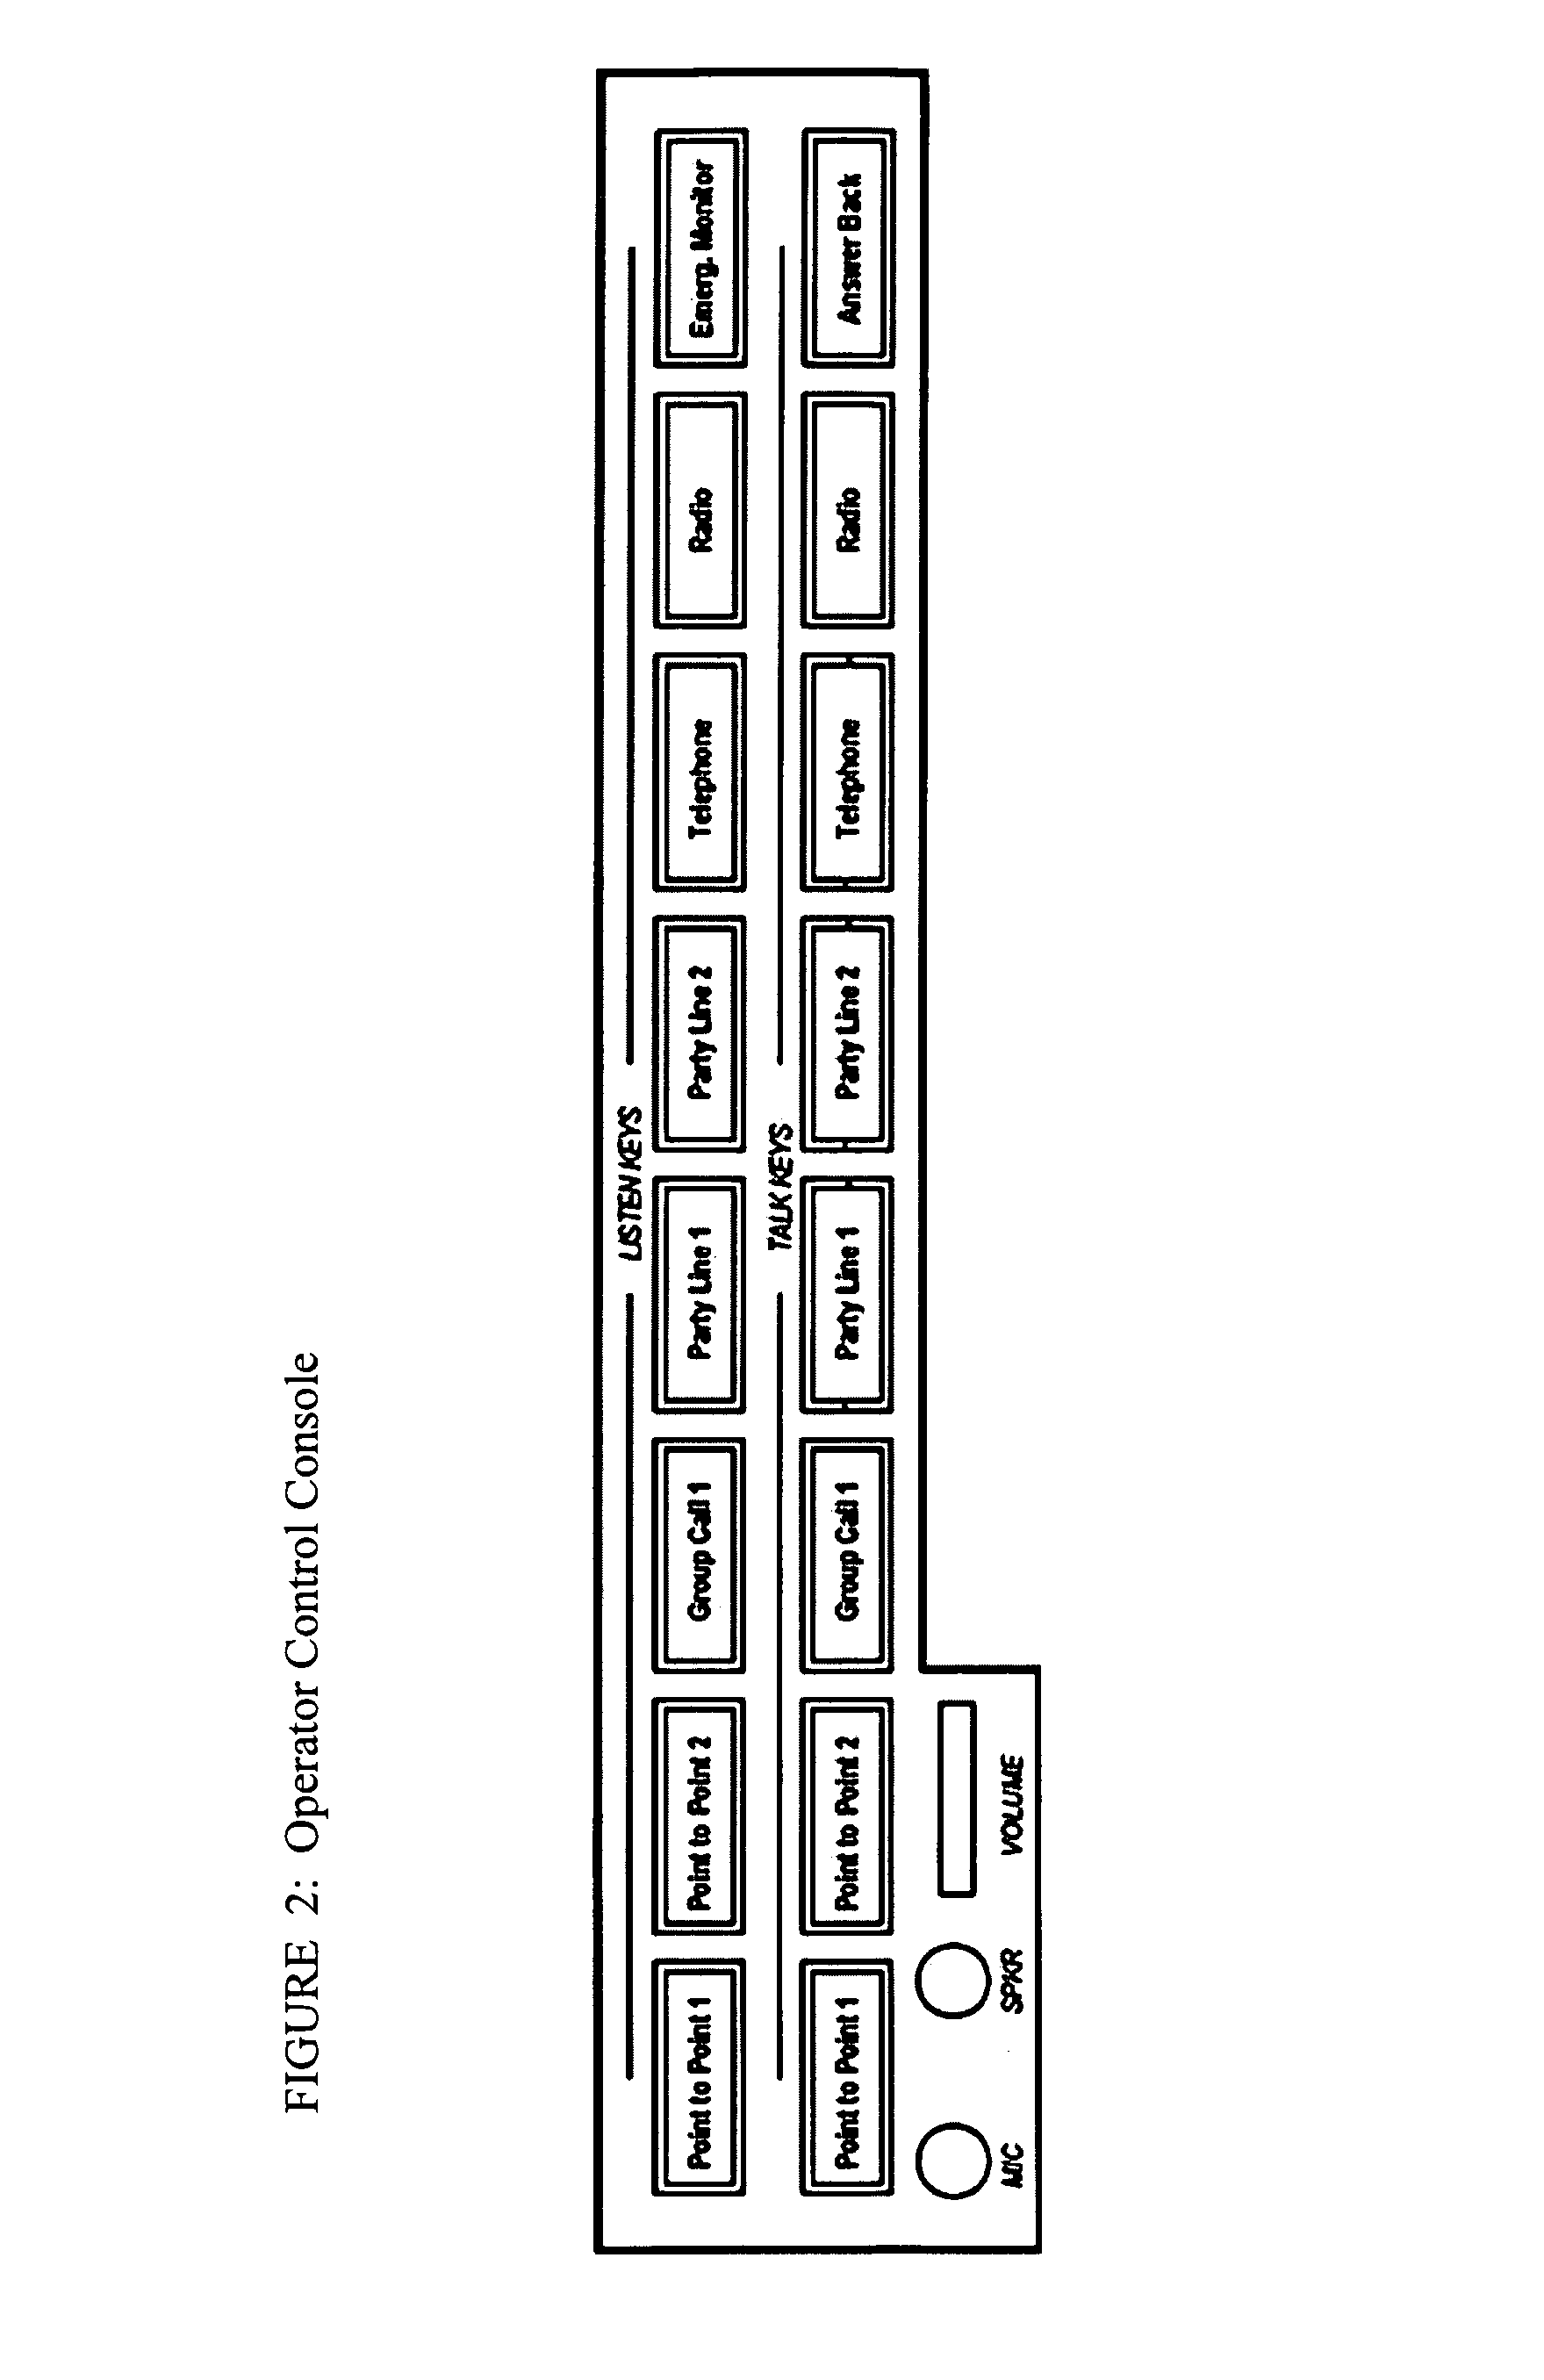 Multi-channel multi-access voice over IP intercommunication systems and methods